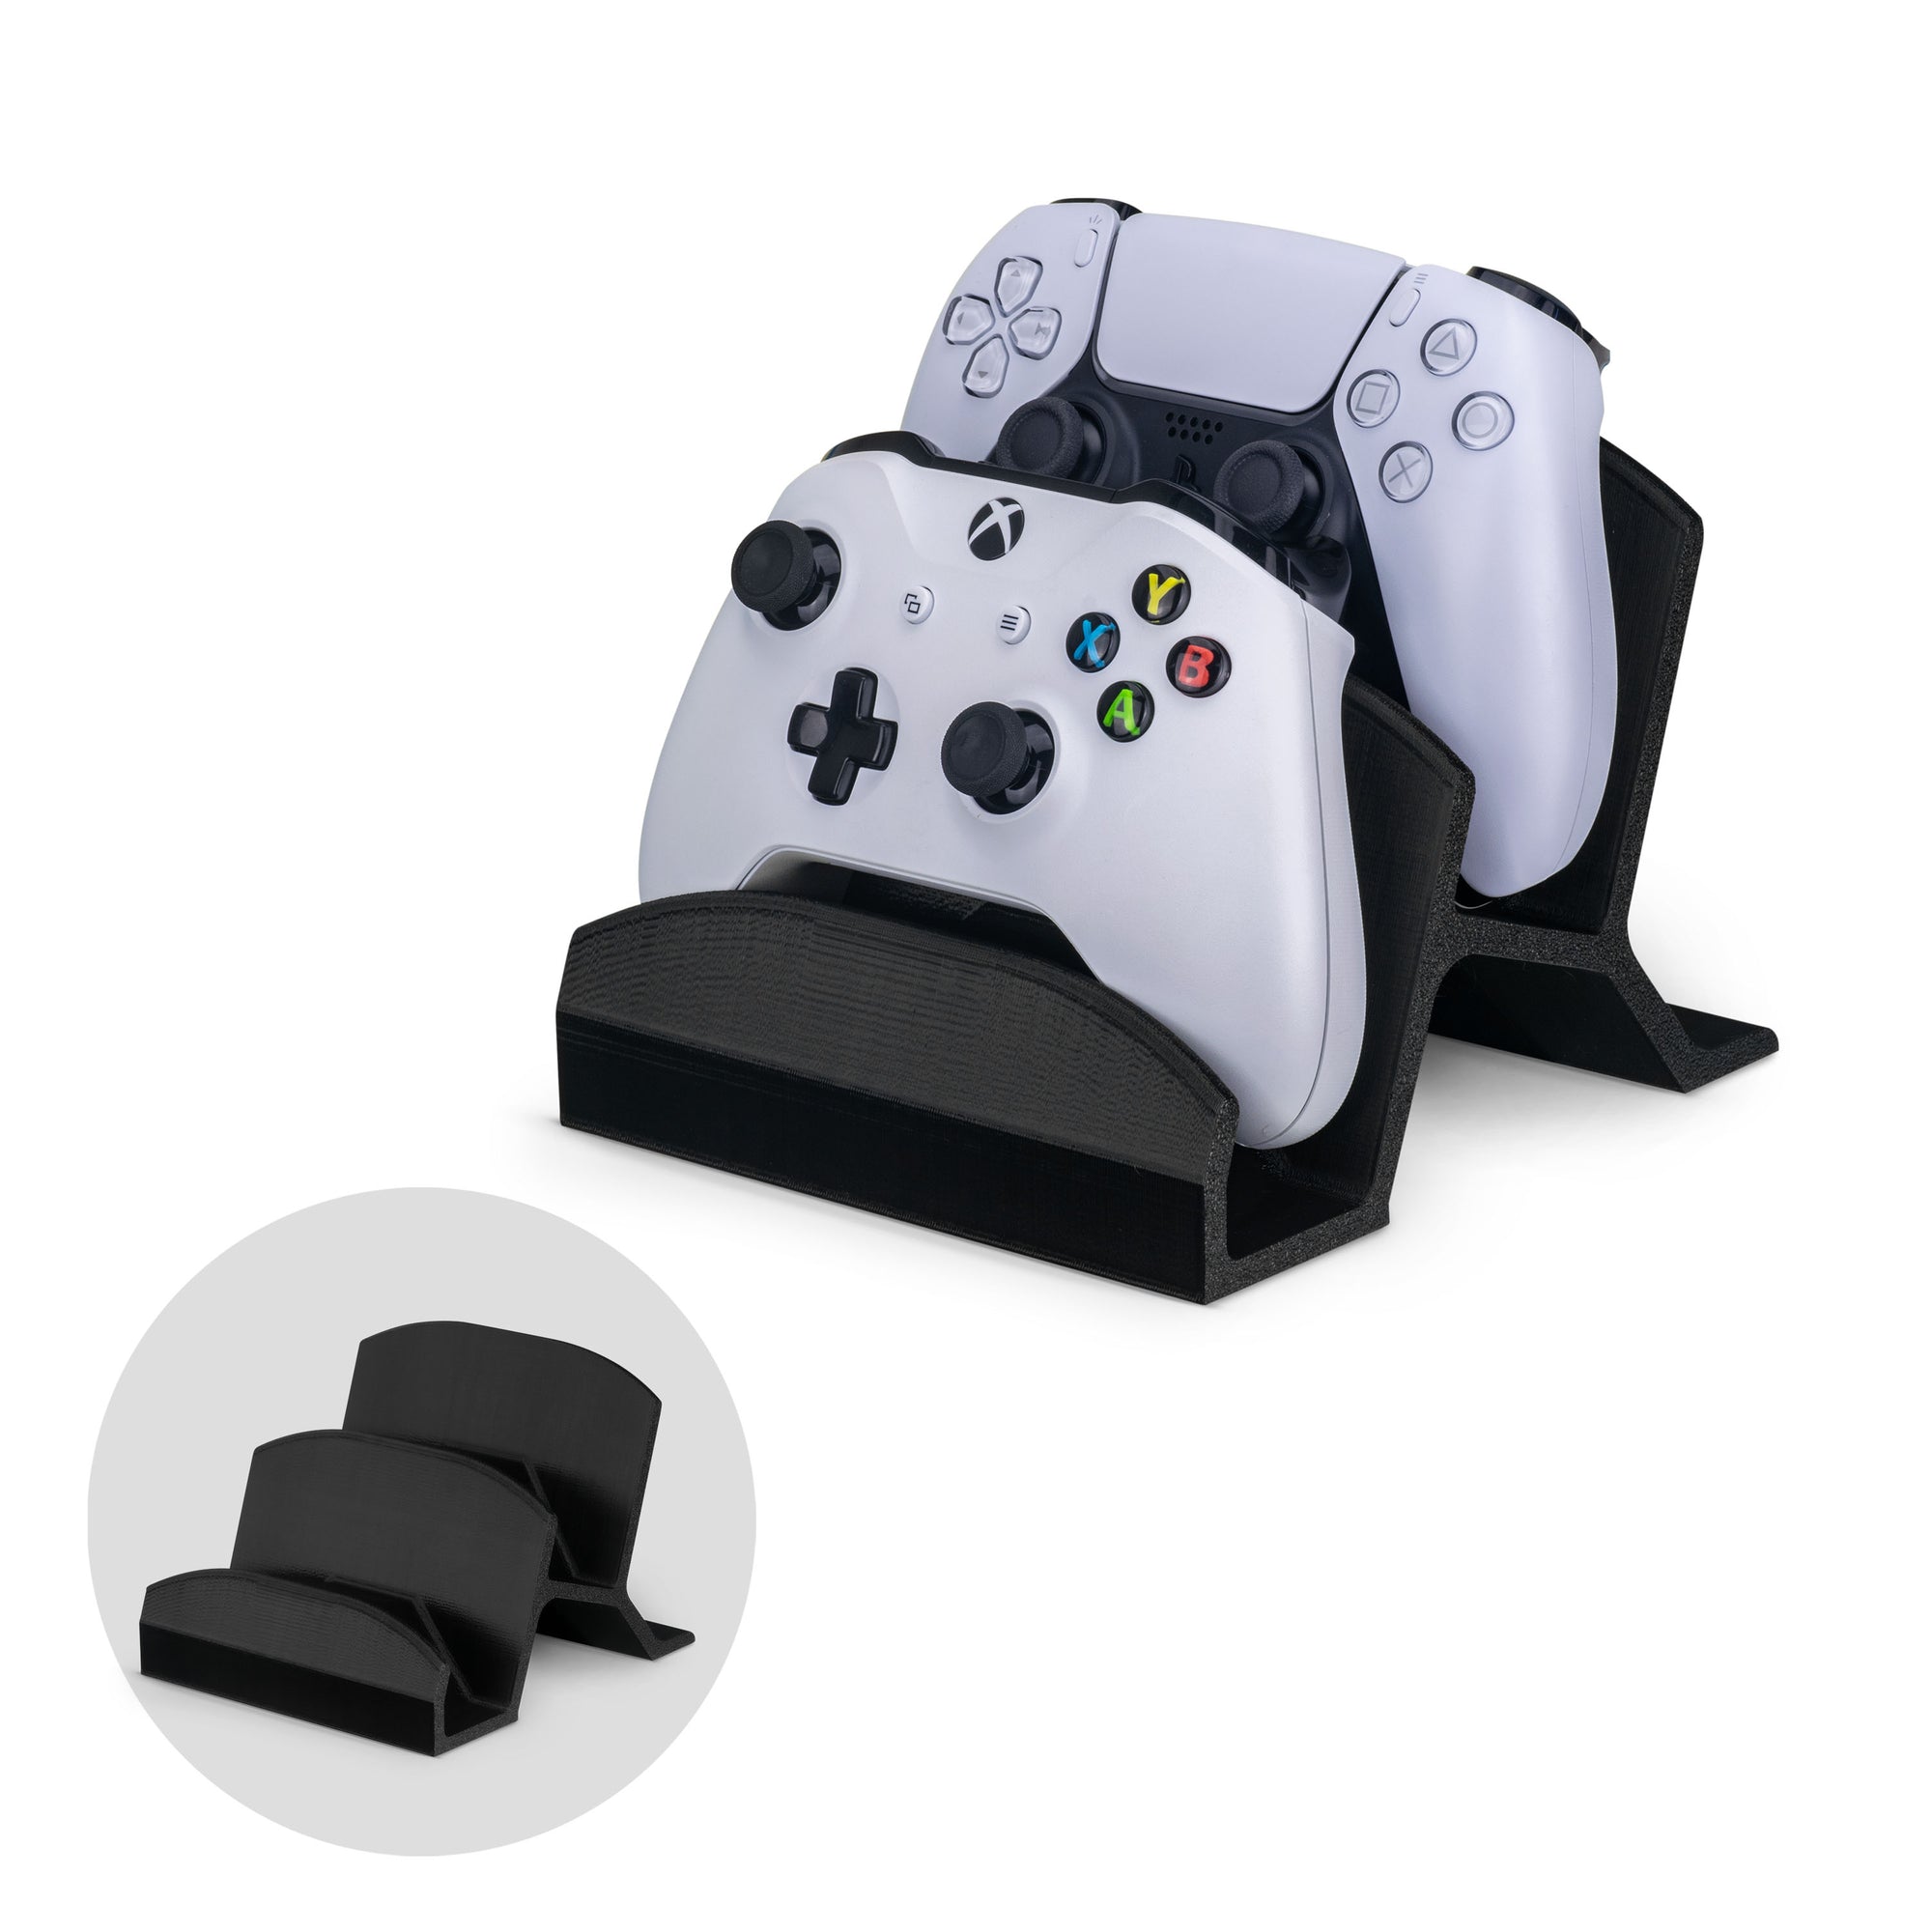 Dual Desktop Game Controller Holder Display Stand - Universal Design For Xbox One, Ps5, Ps4, Pc, Steelseries, Steam & More - UGDS-06